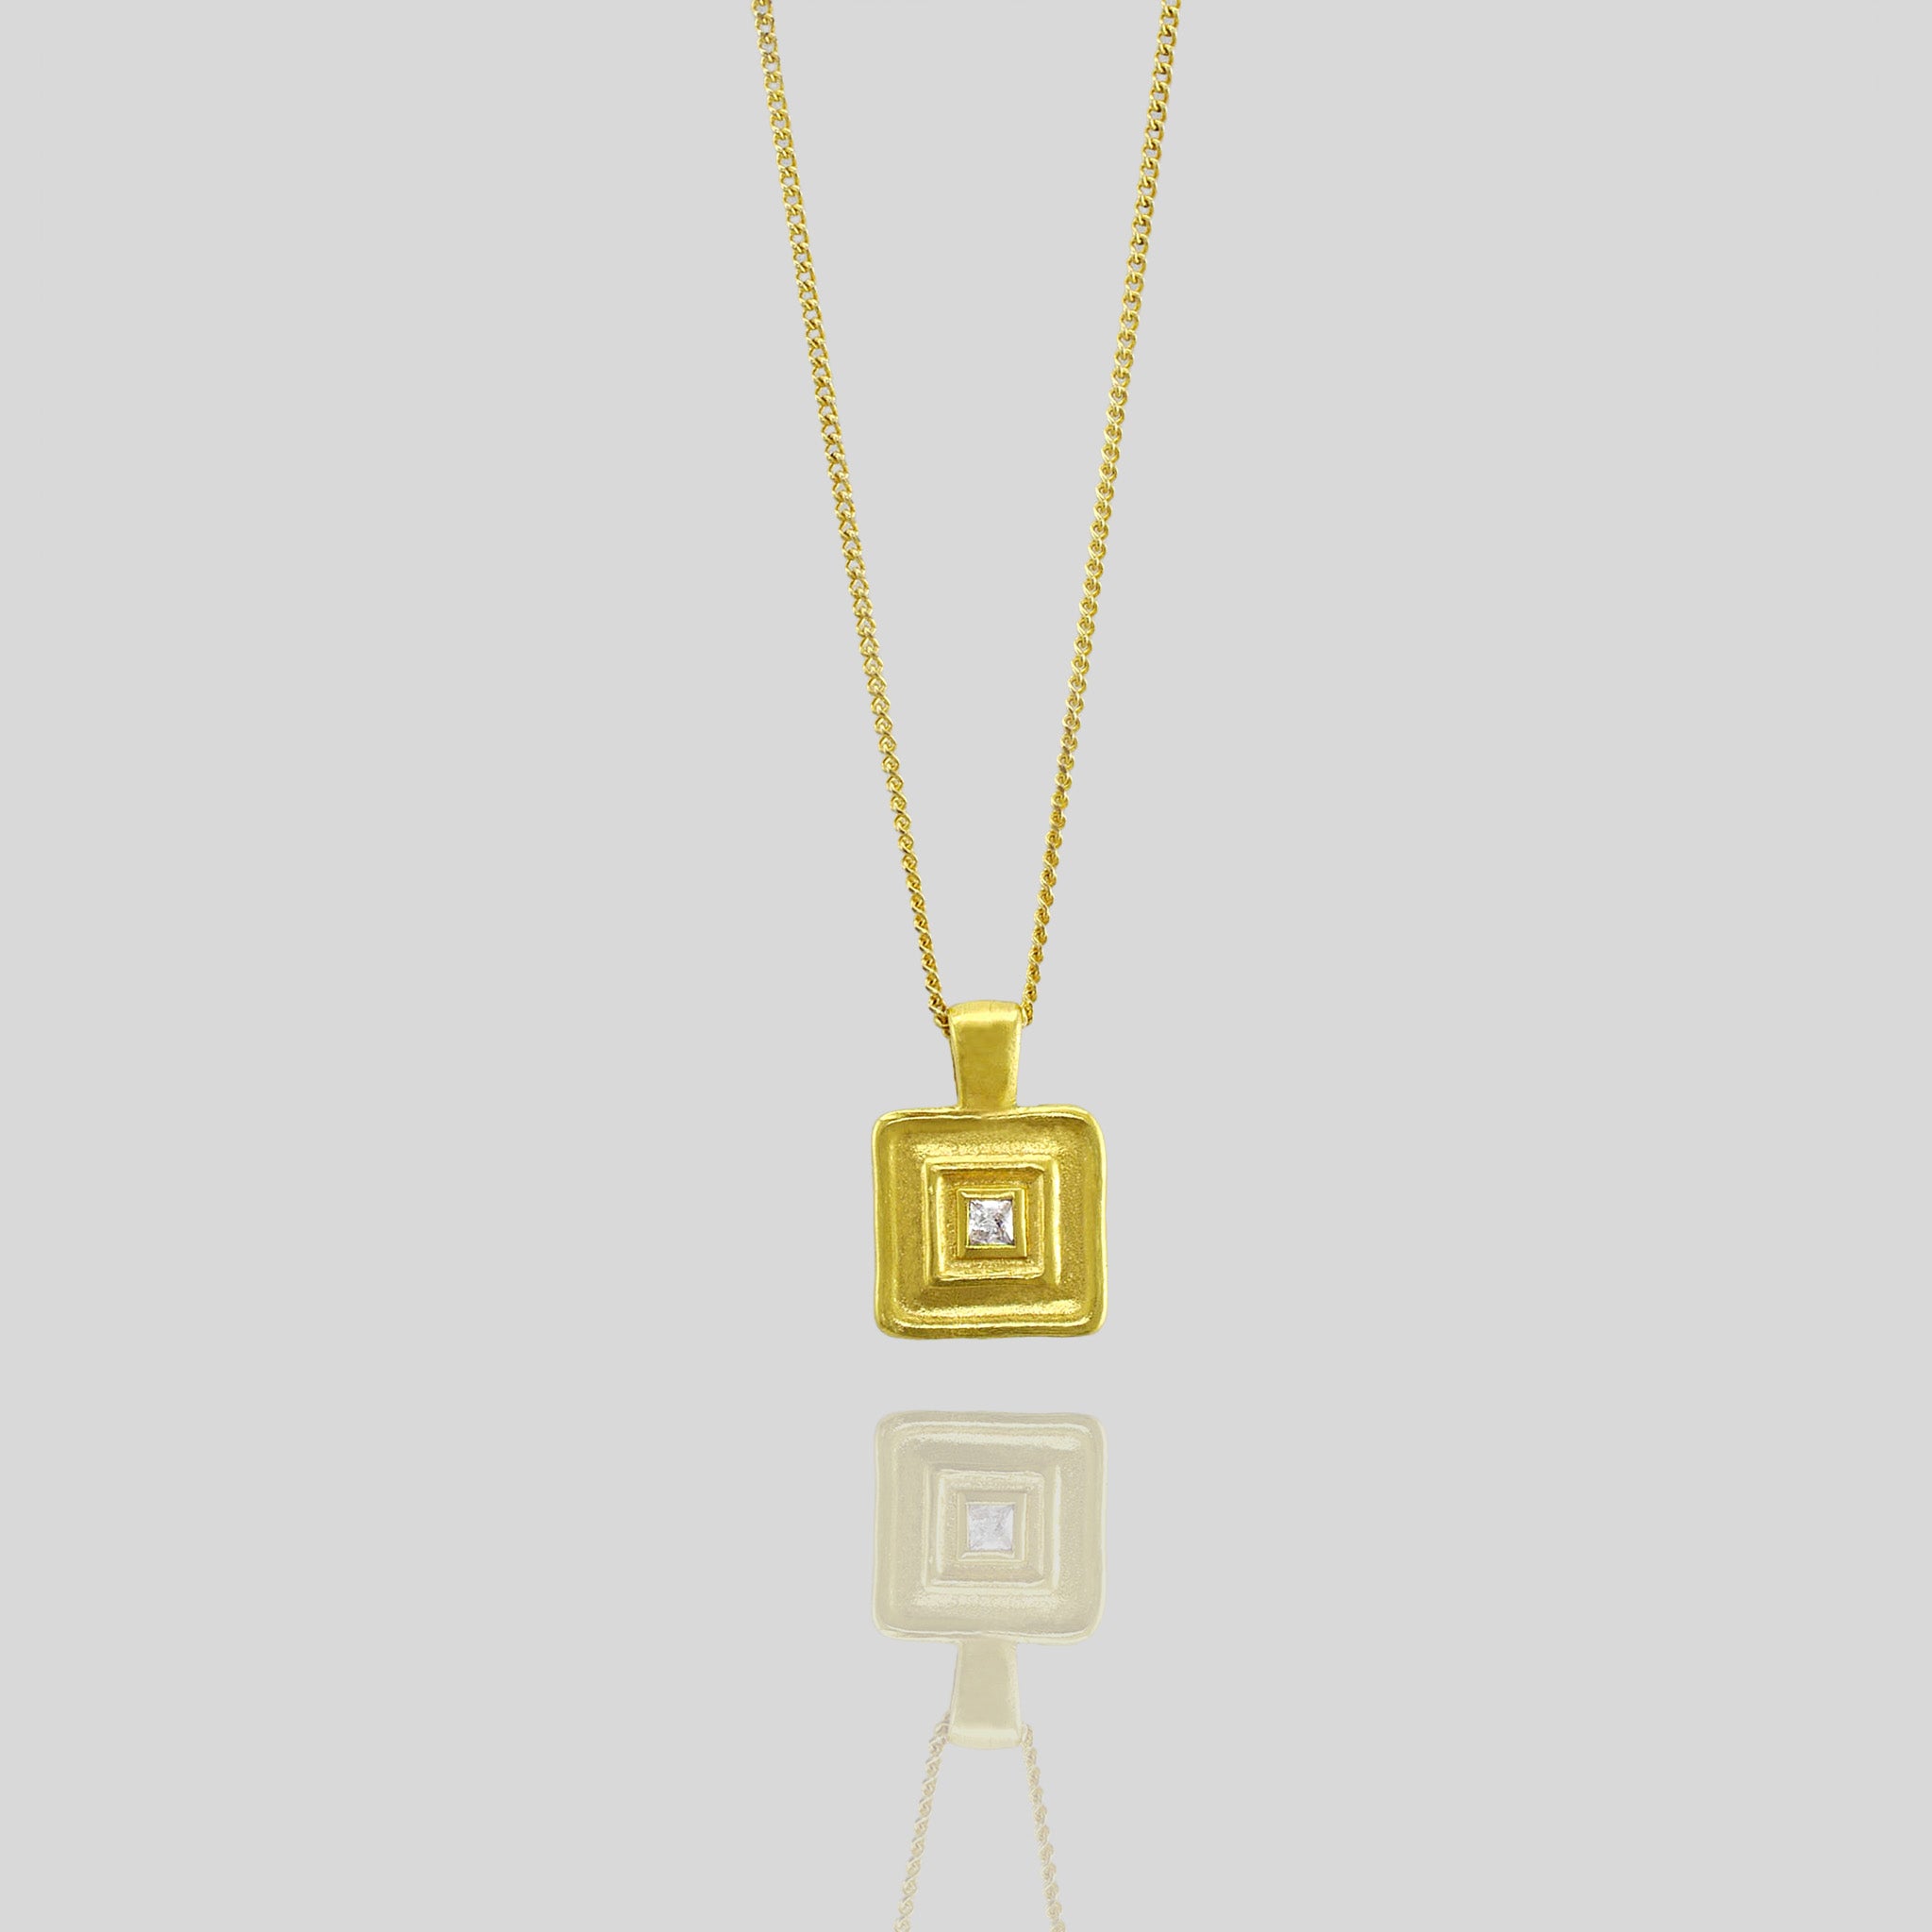 Handmade square gold pendant featuring a square diamond at its heart, crafted from Yellow Gold to mirror the majestic jewelry of ancient Egyptian Pharaohs.